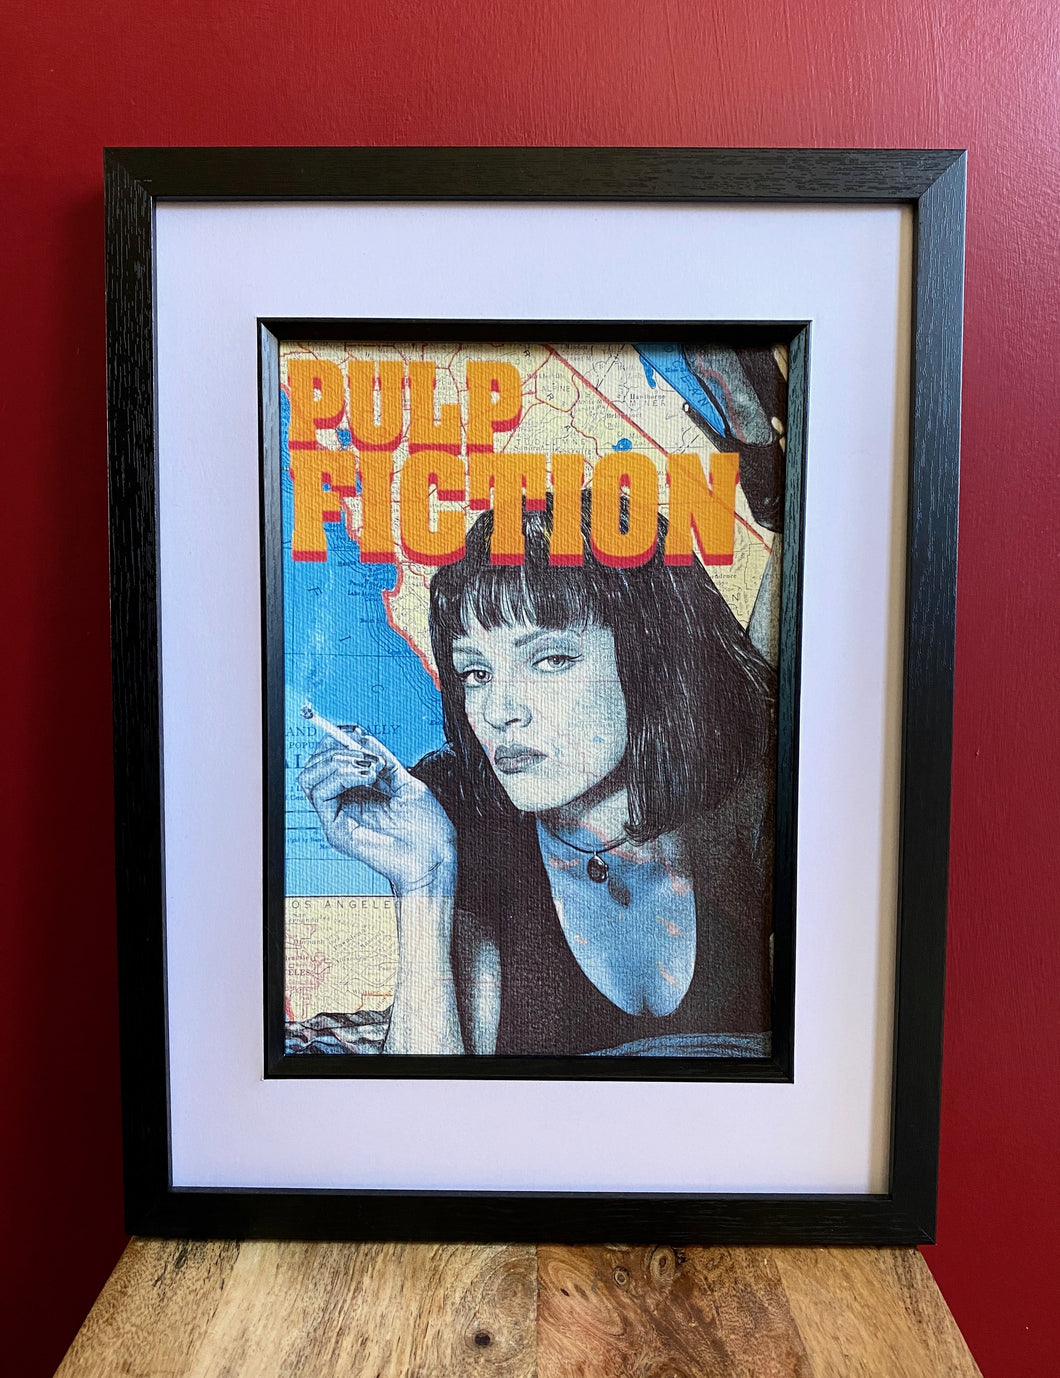 Pulp Fiction Art Print. Pen Drawing Over Map Of Los Angeles. A4 Unframed